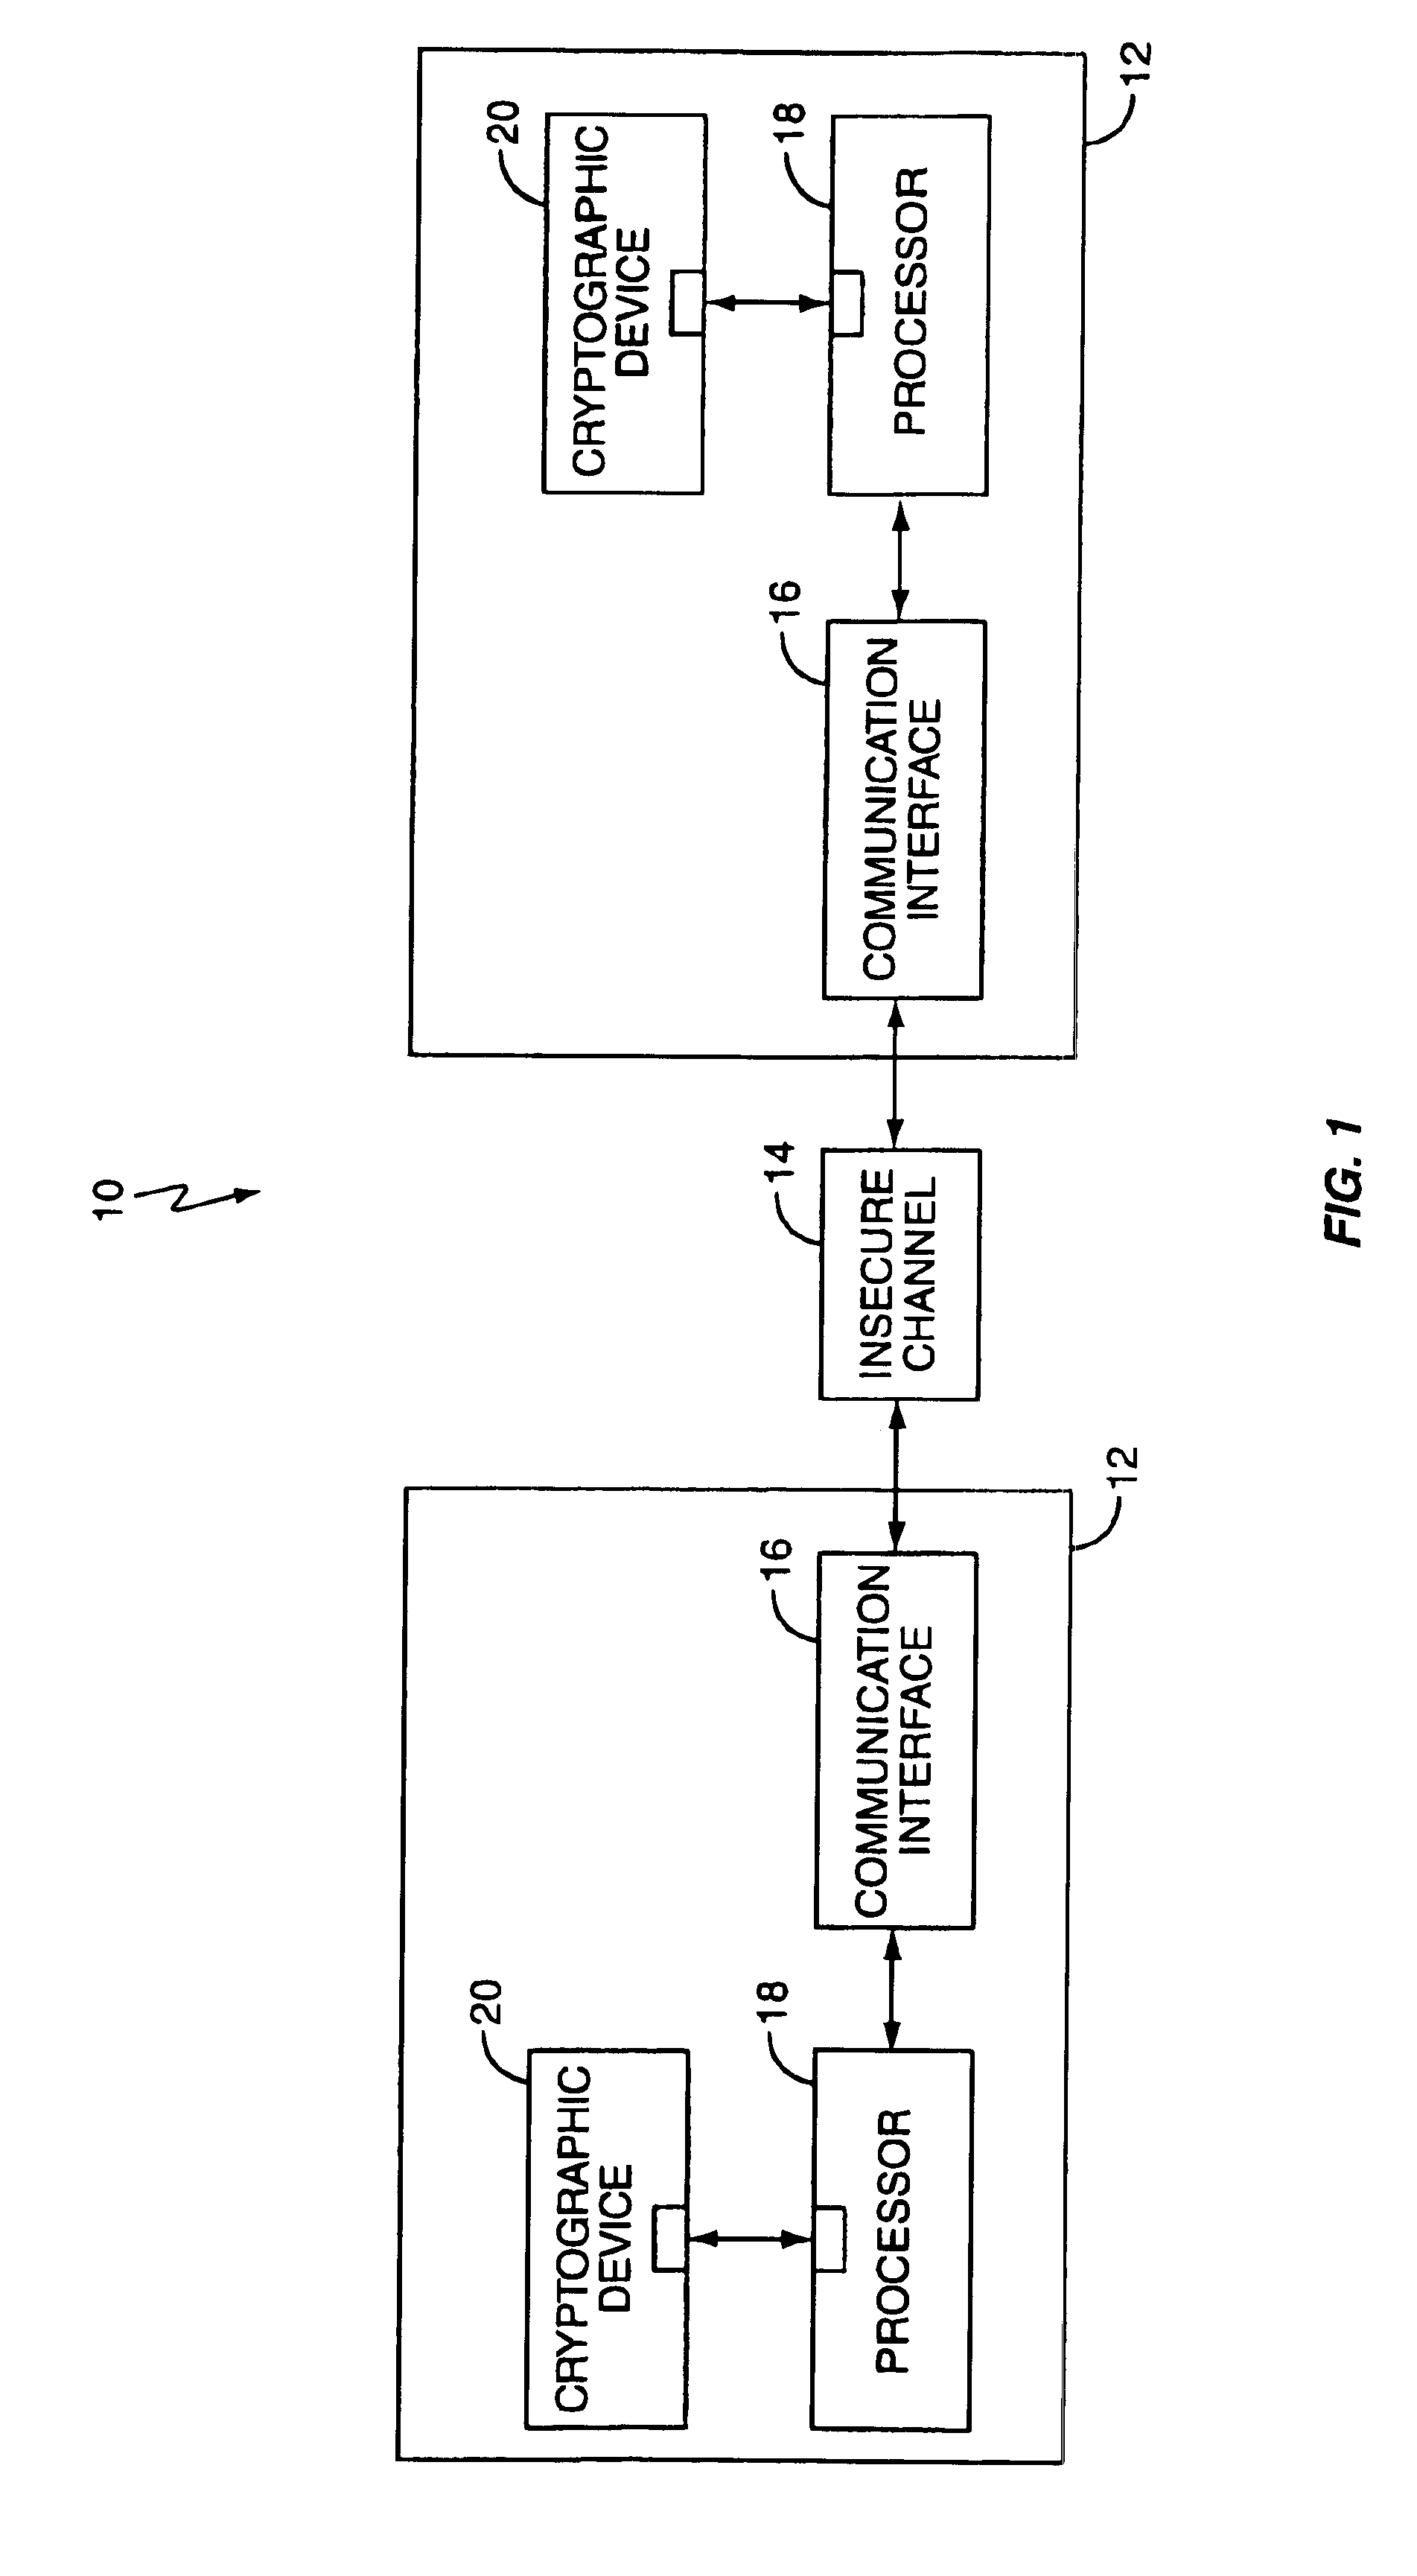 Cryptographic method and system for double encryption of messages